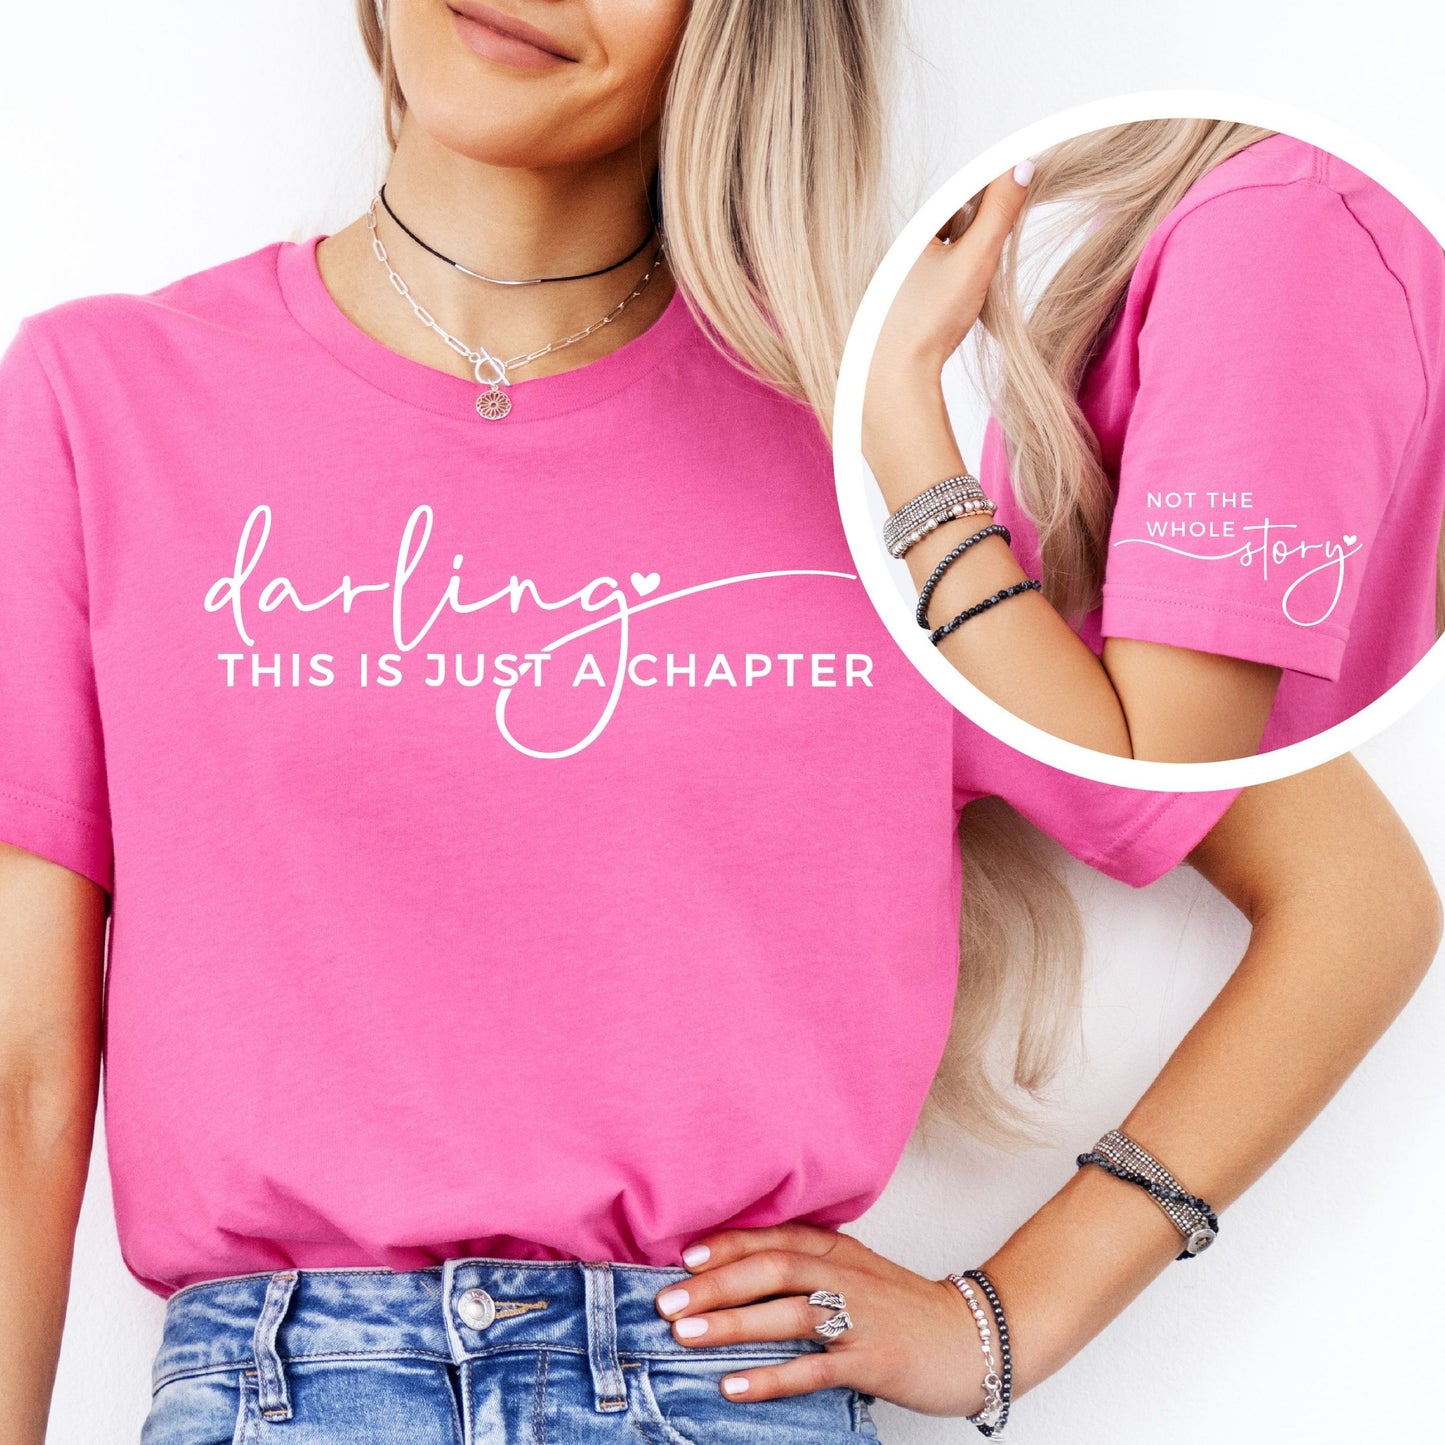 Darling This Is Just A Chapter T-Shirt - Mardonyx T-Shirt XS / Charity Pink